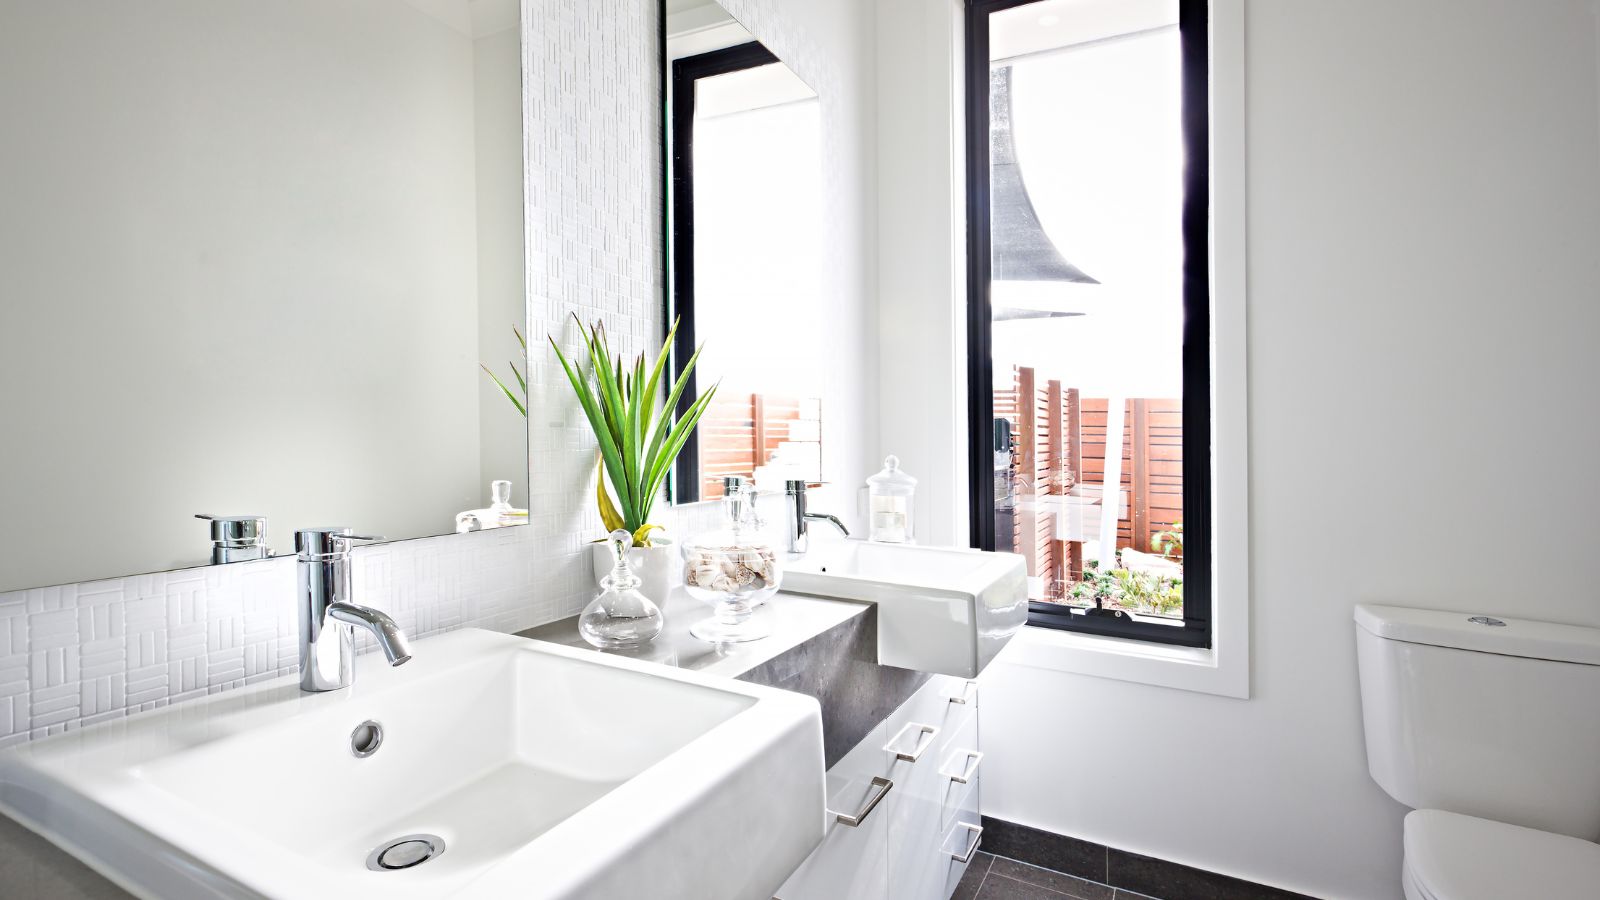 Get the Most Out of Your Double Sink Bathroom Vanity set With These Storage Tips.
